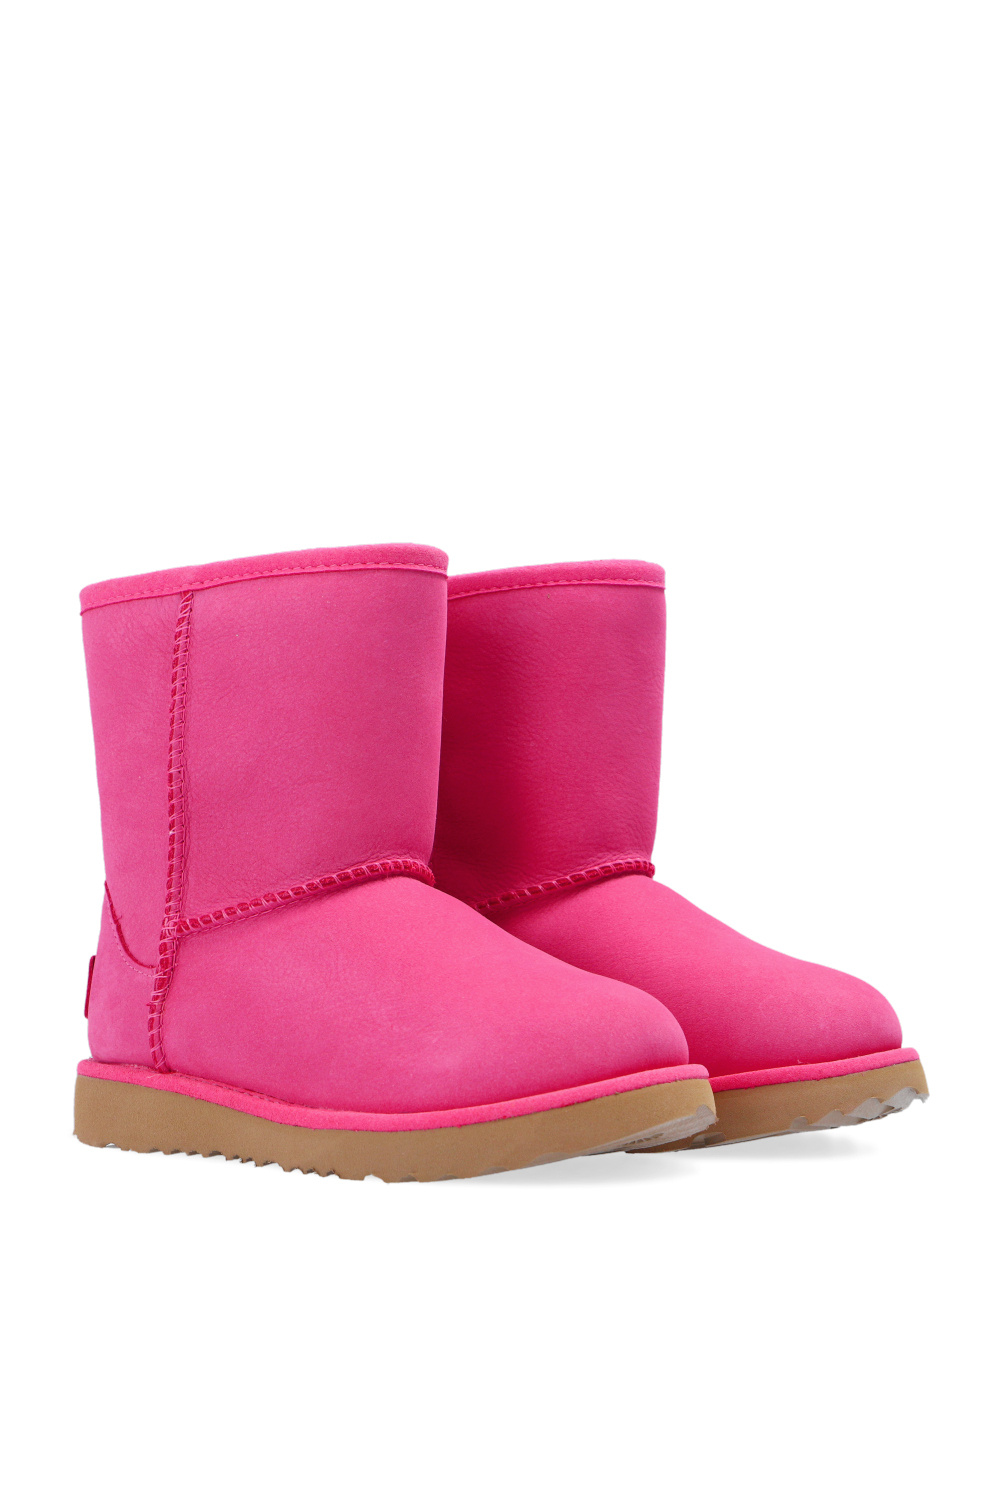 ugg Gaila Kids ‘Classic Weather Short’ snow boots